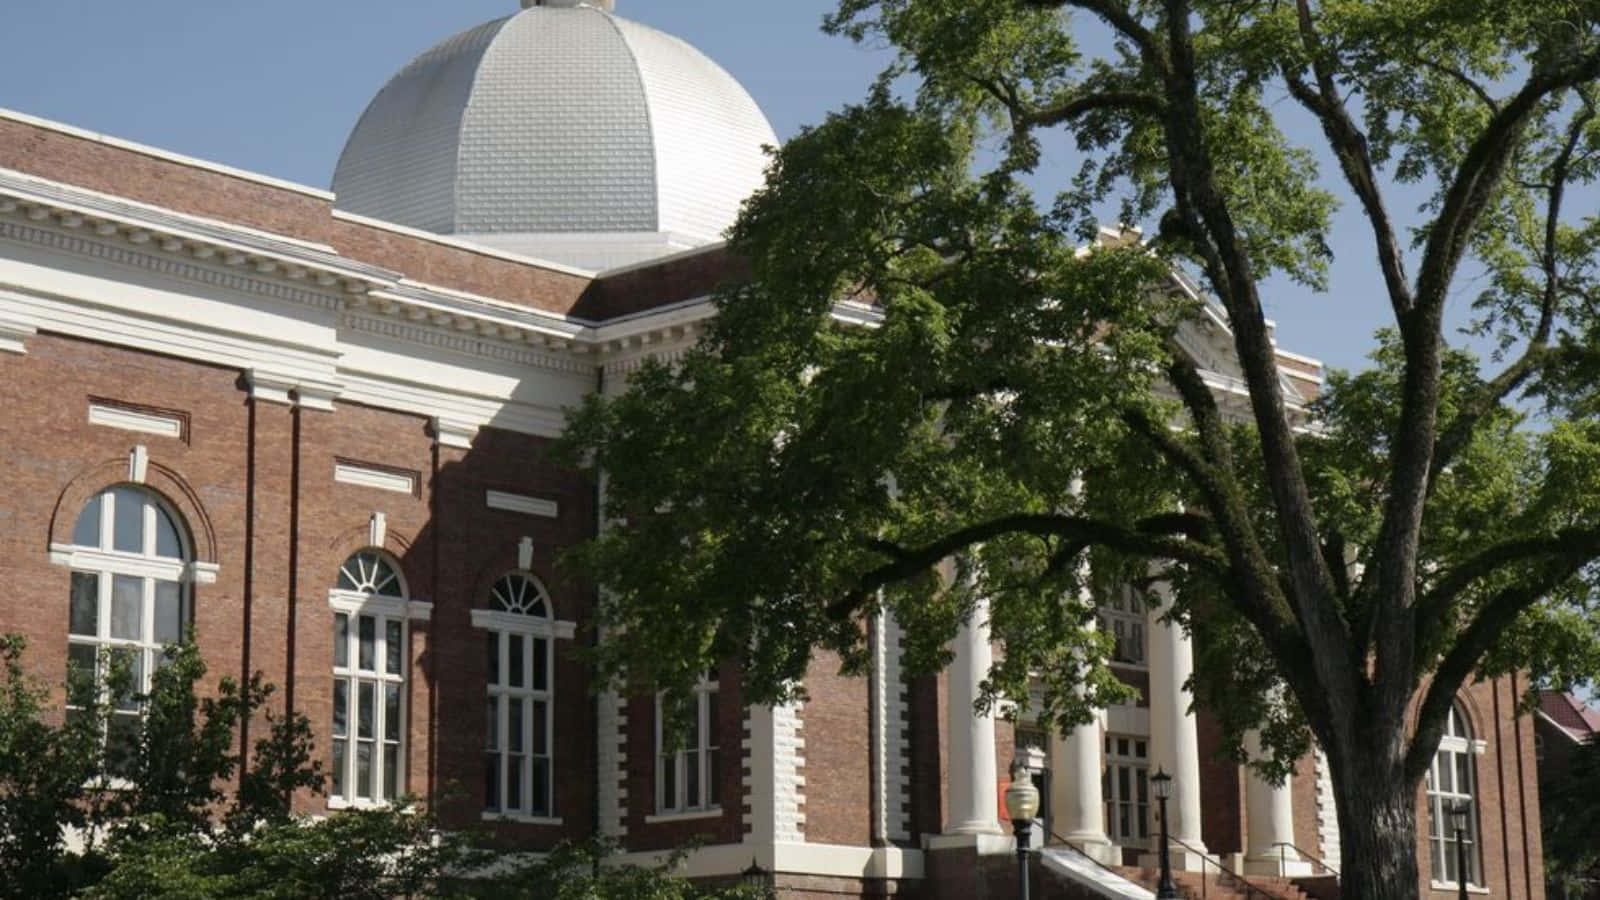 Classic College Buildingwith Dome Wallpaper